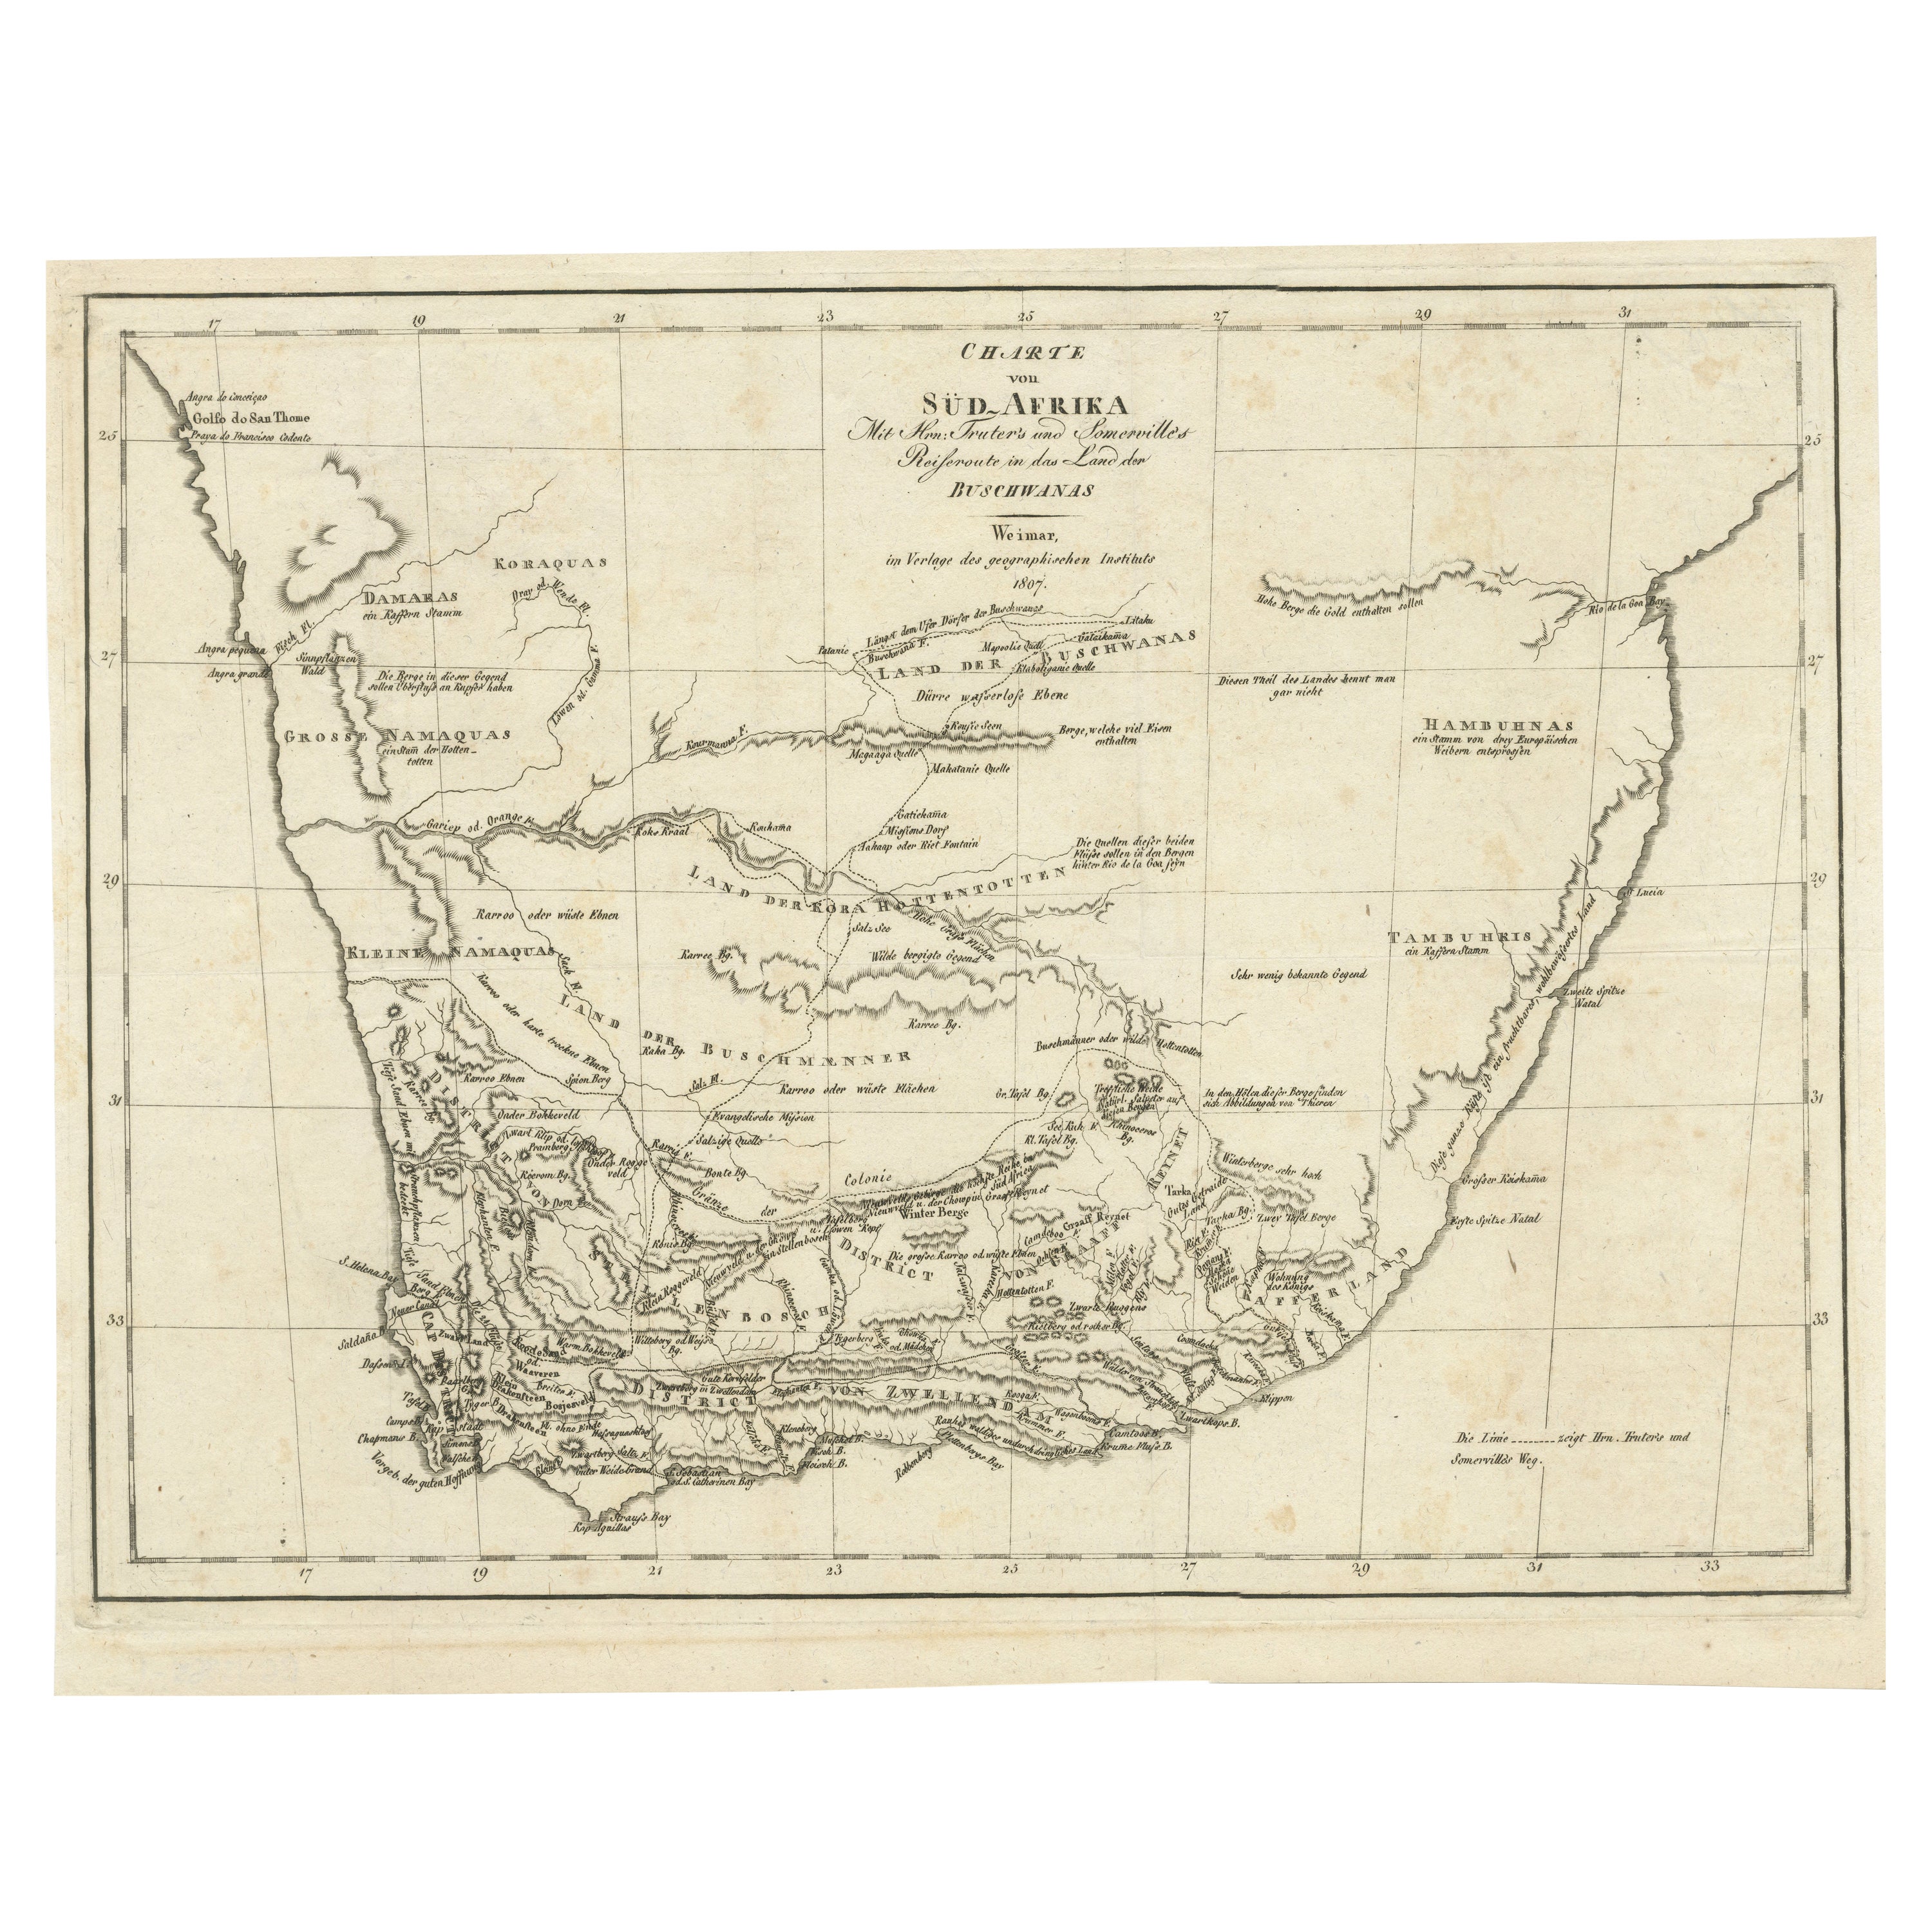 Antique Map of South Africa showing the Travels of Truter and Somerville